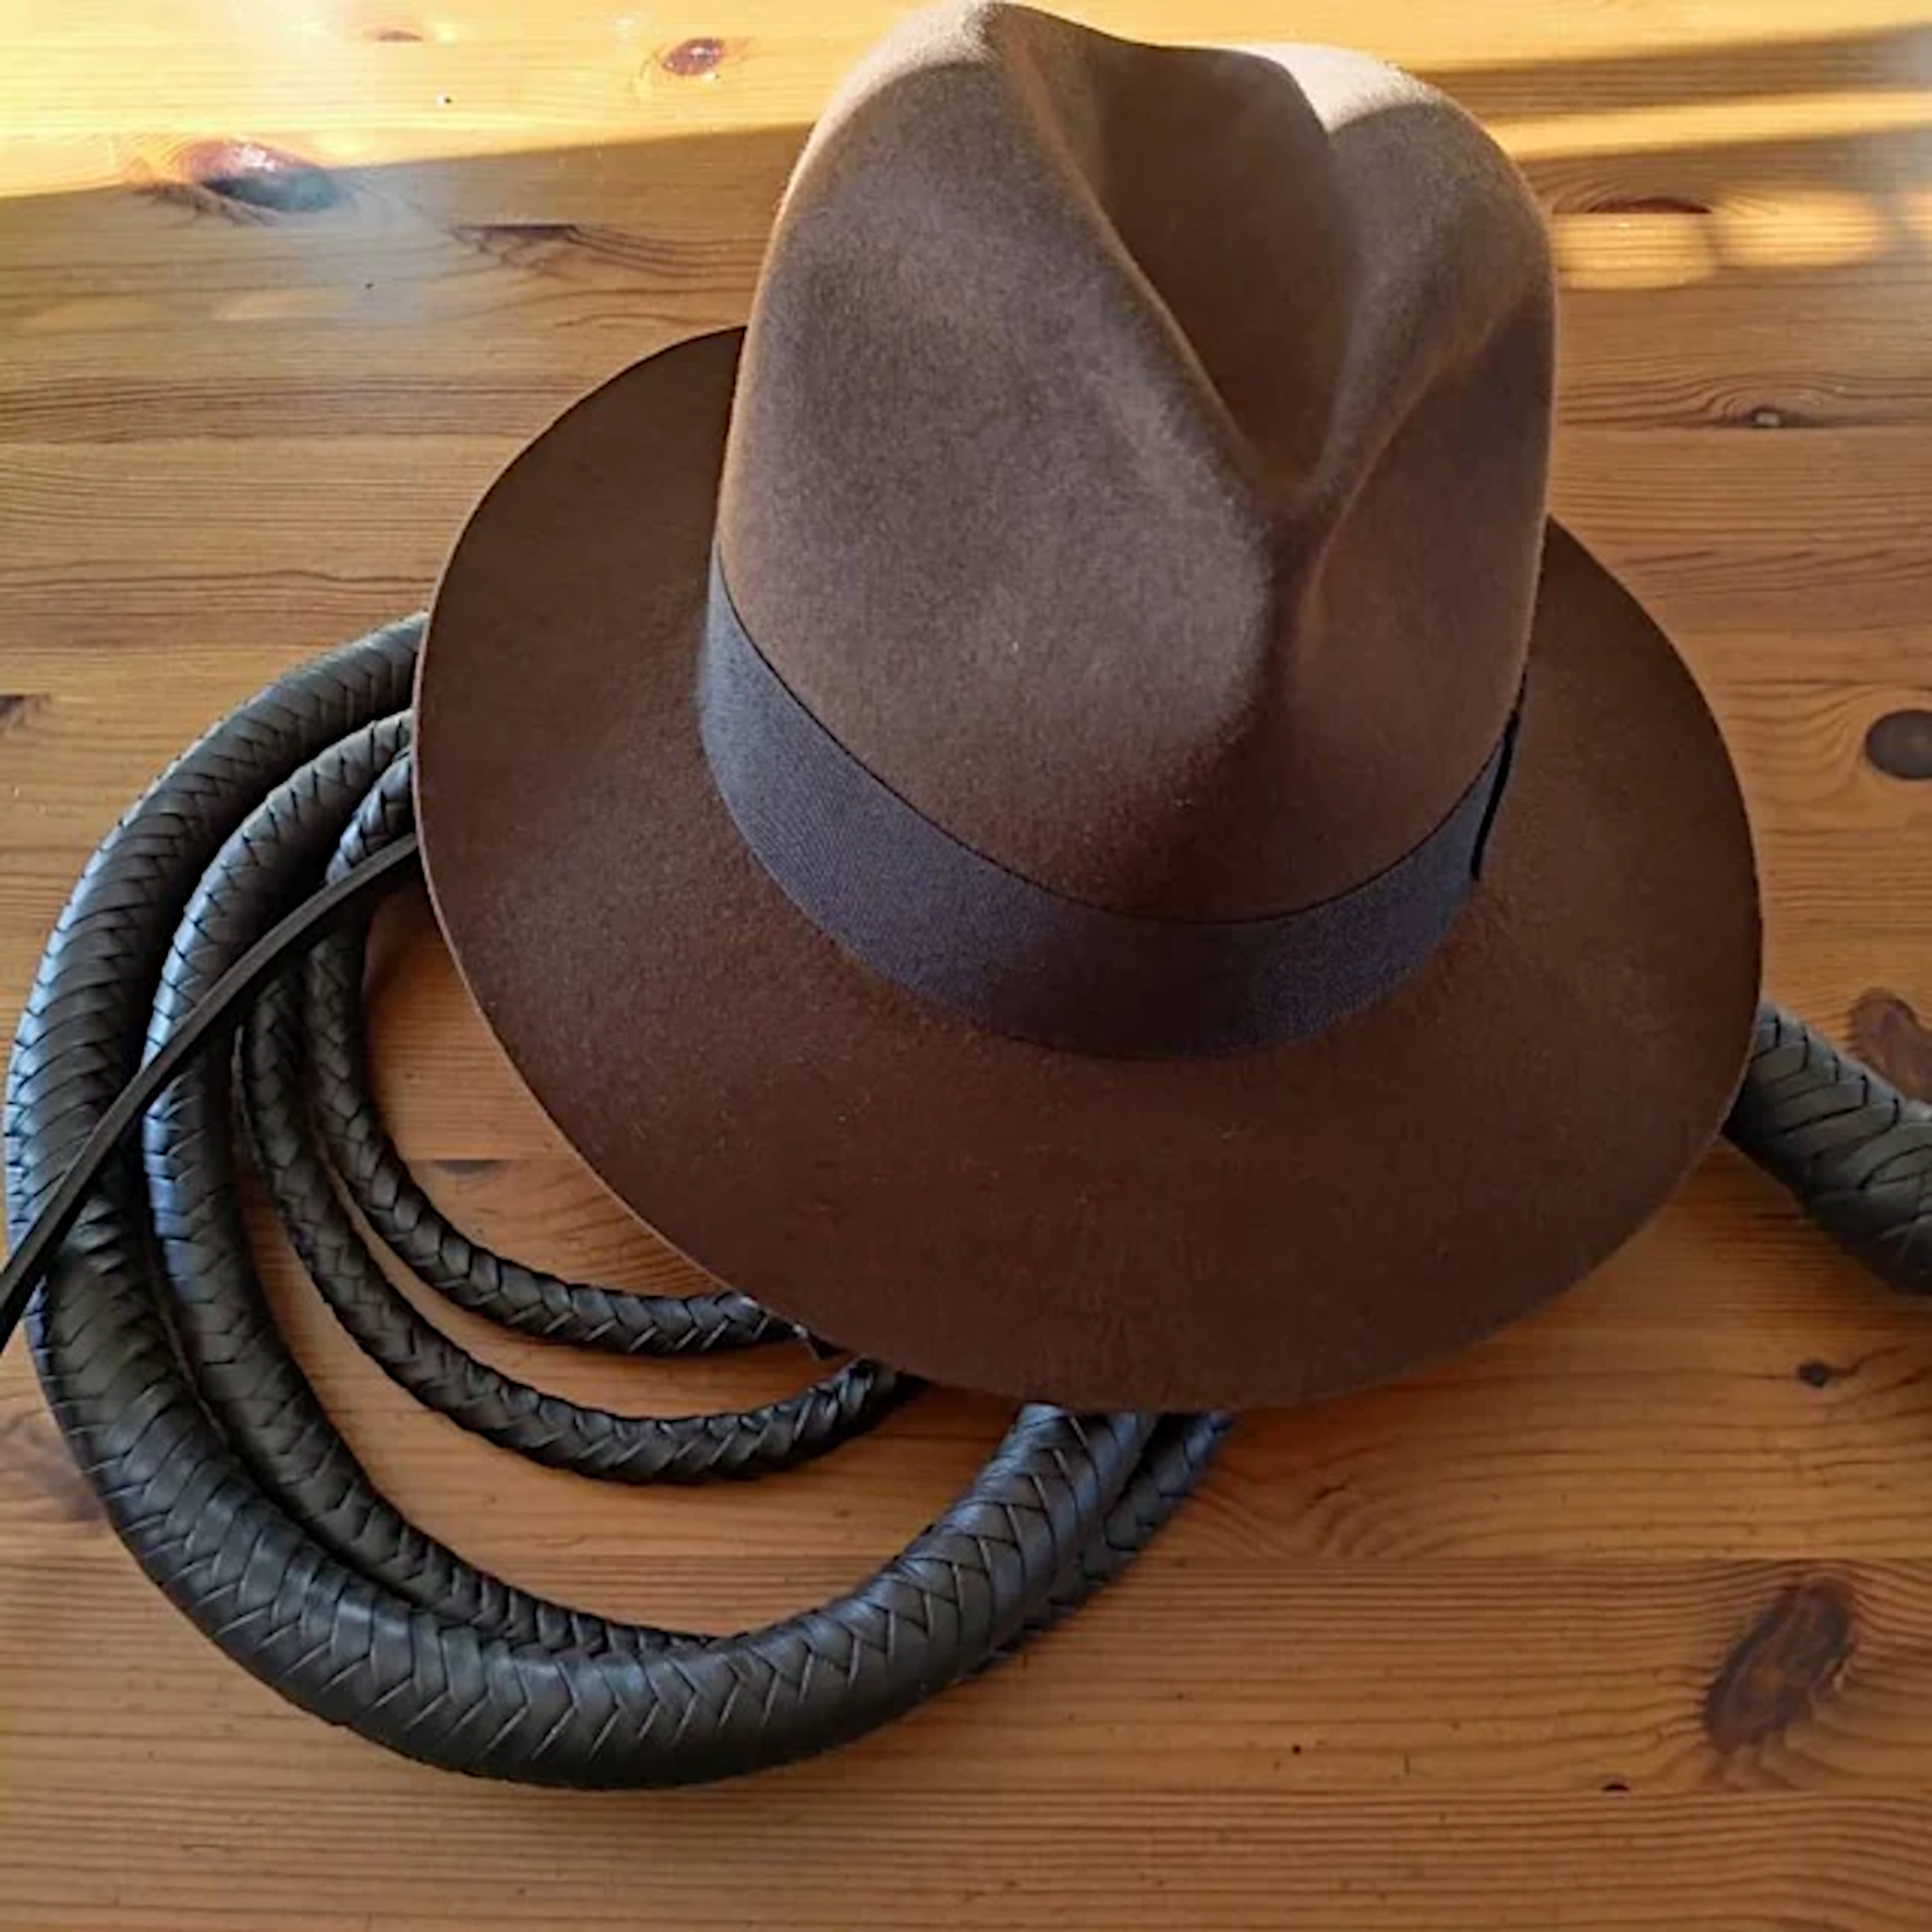 An Agnoulita hat in the style of Indiana Jones, accompanied by an iconic leather whip.